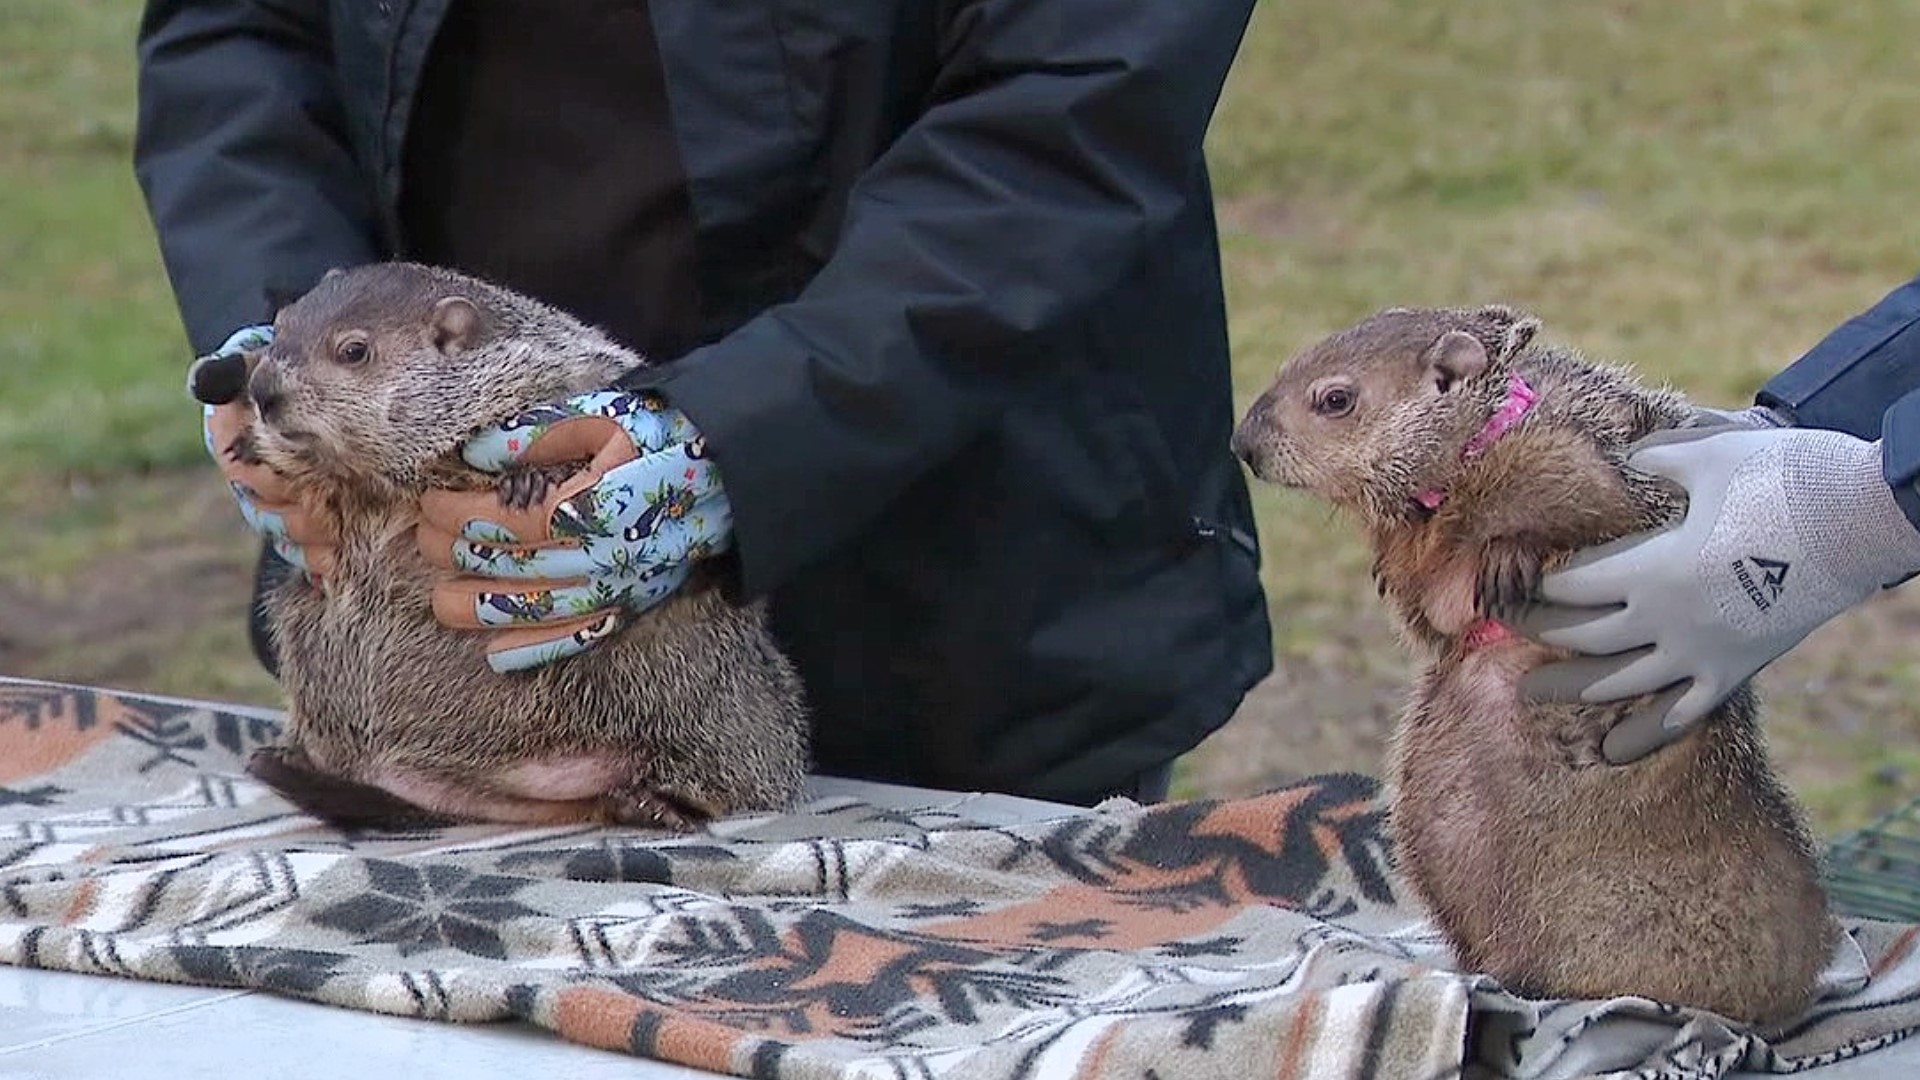 Newswatch 16's Amanda Eustice shows us how this Groundhog Day celebration was used to teach people about the animal.